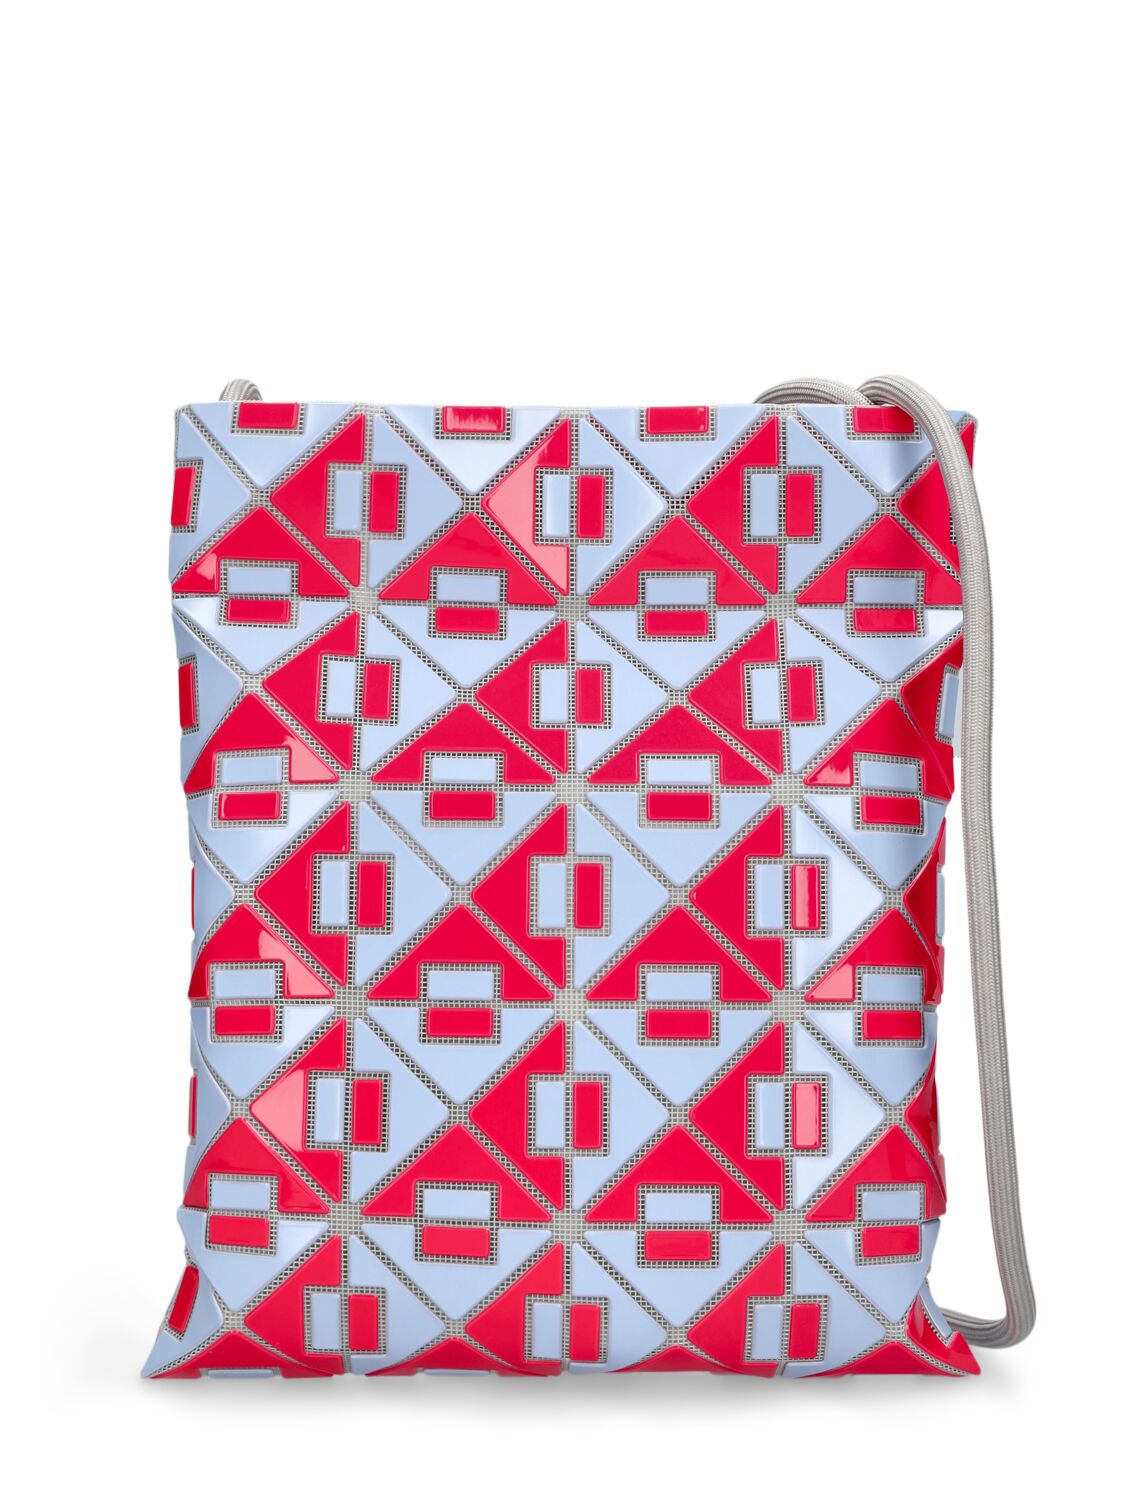 Bao Bao Issey Miyake Coonect Shoulder Bag In Red,ice Blue